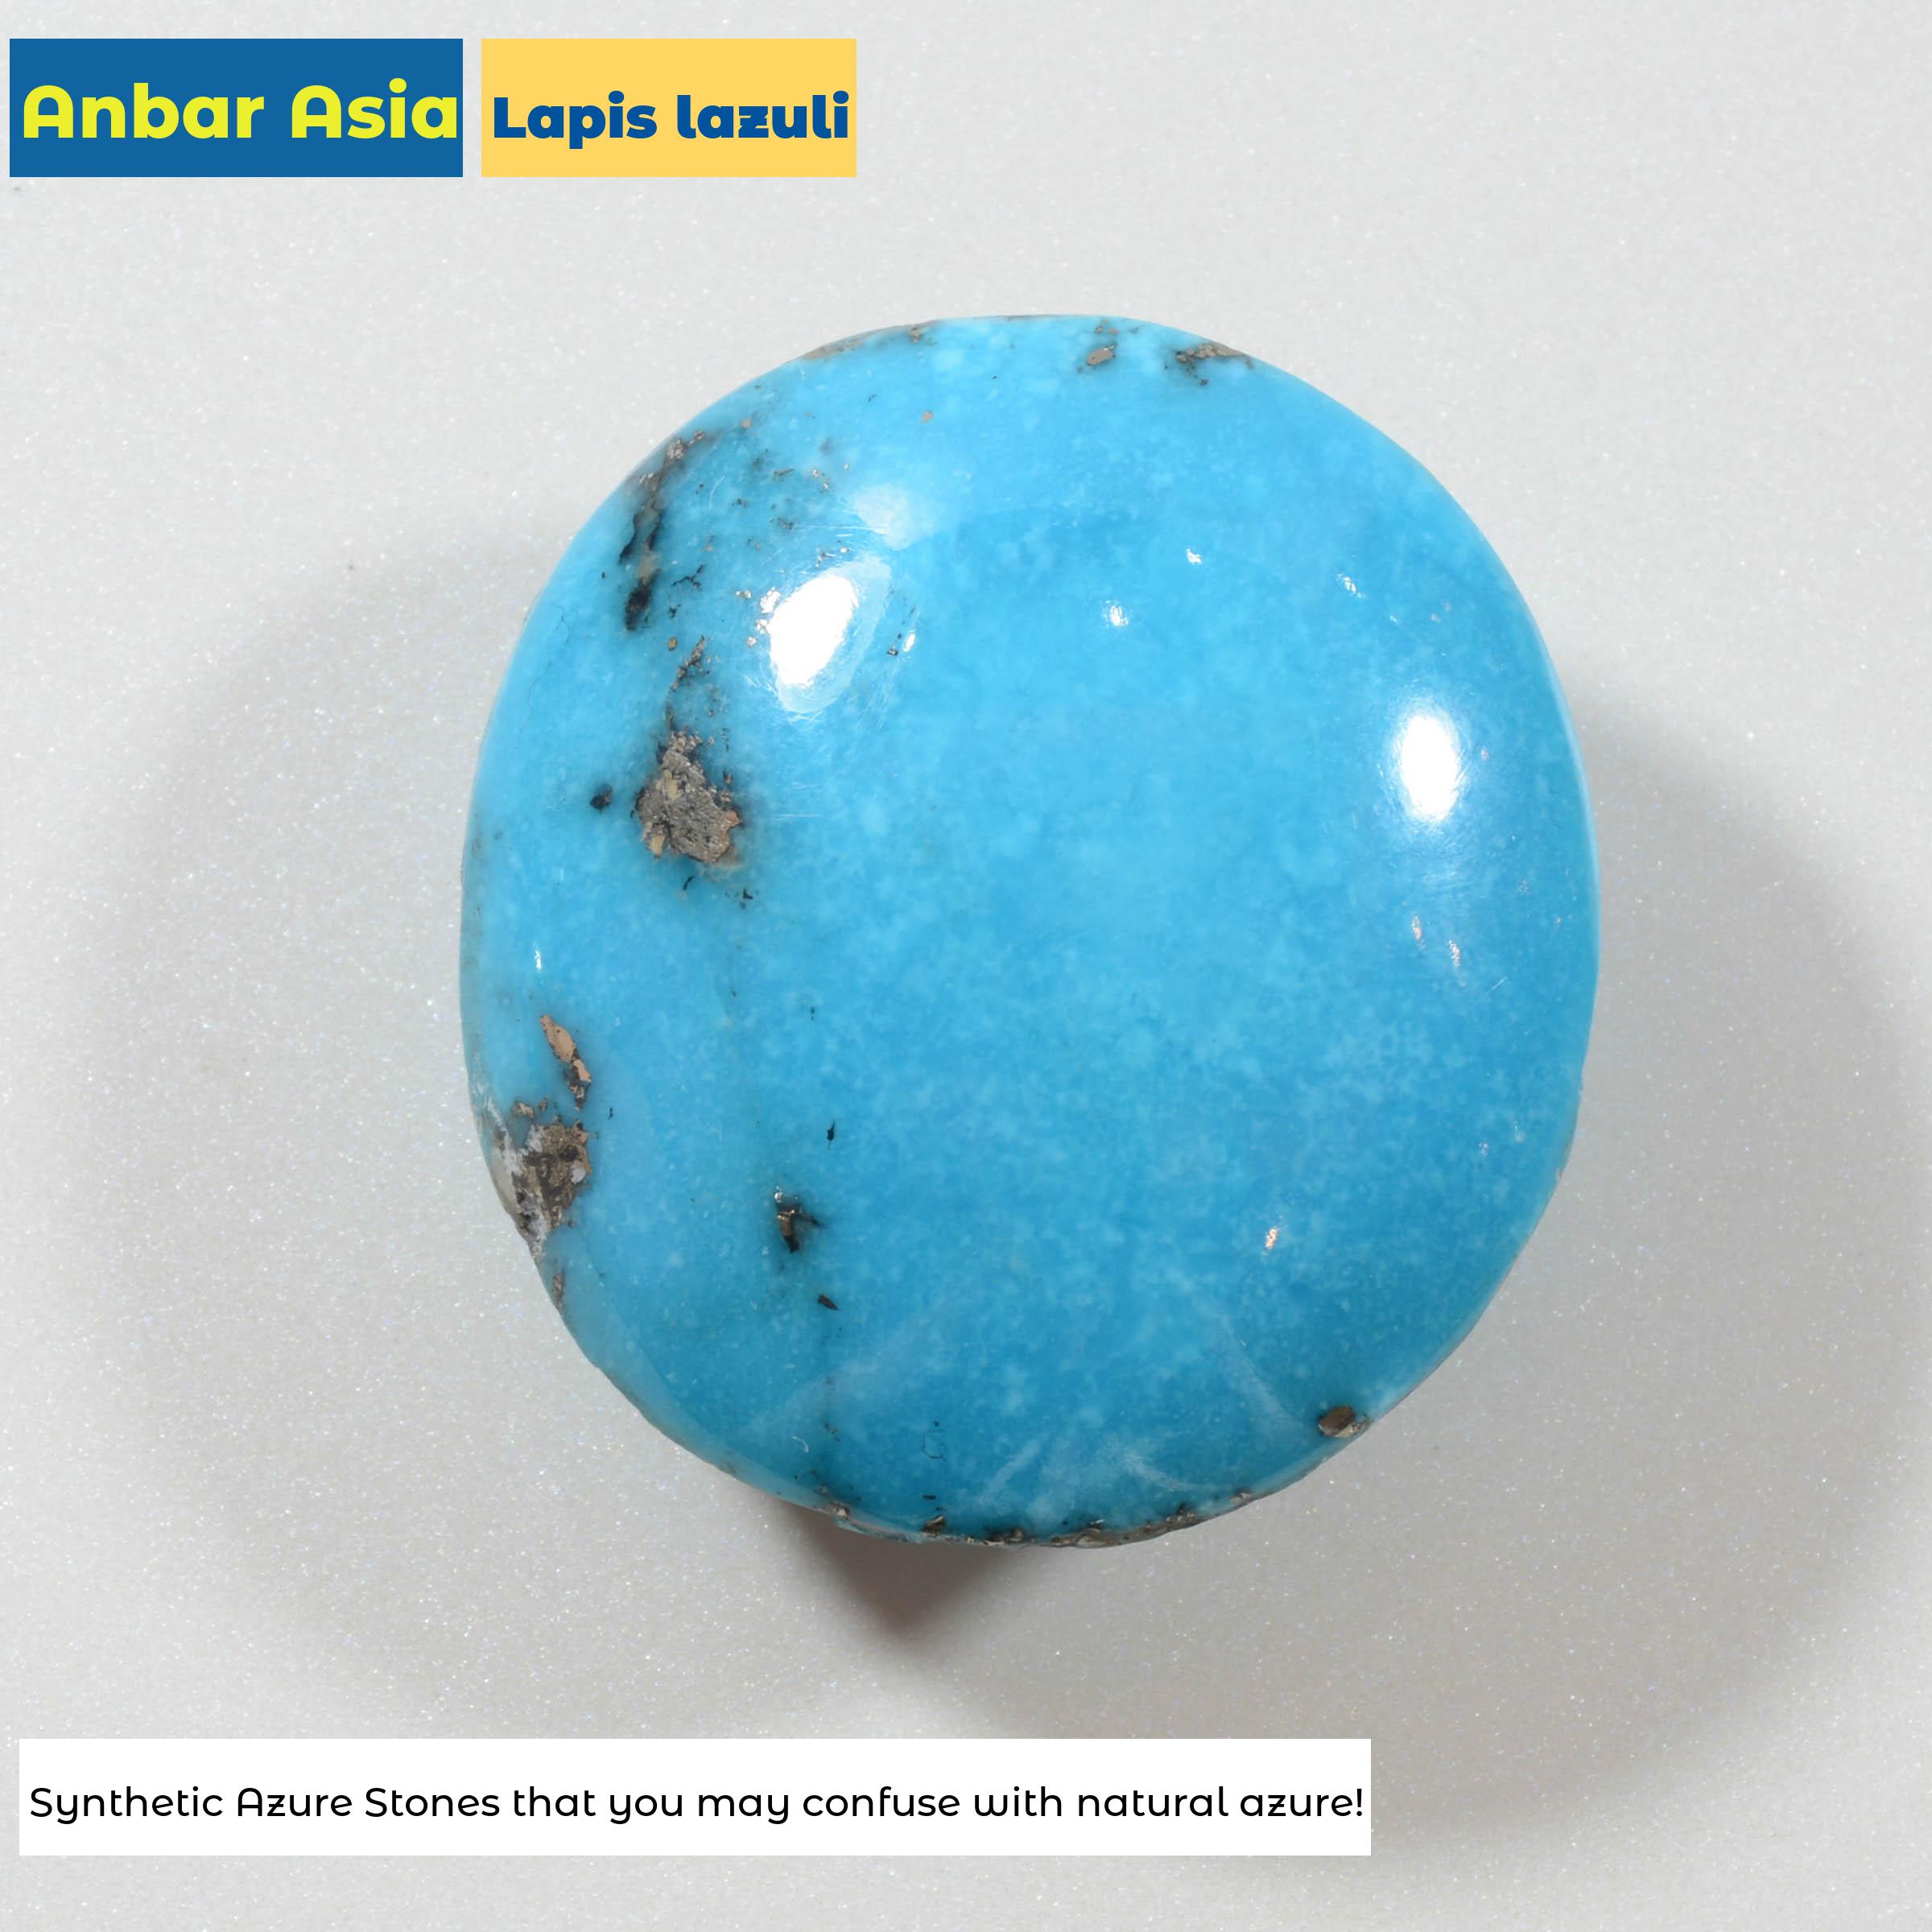 Synthetic Azure Stones that you may confuse with natural azure!